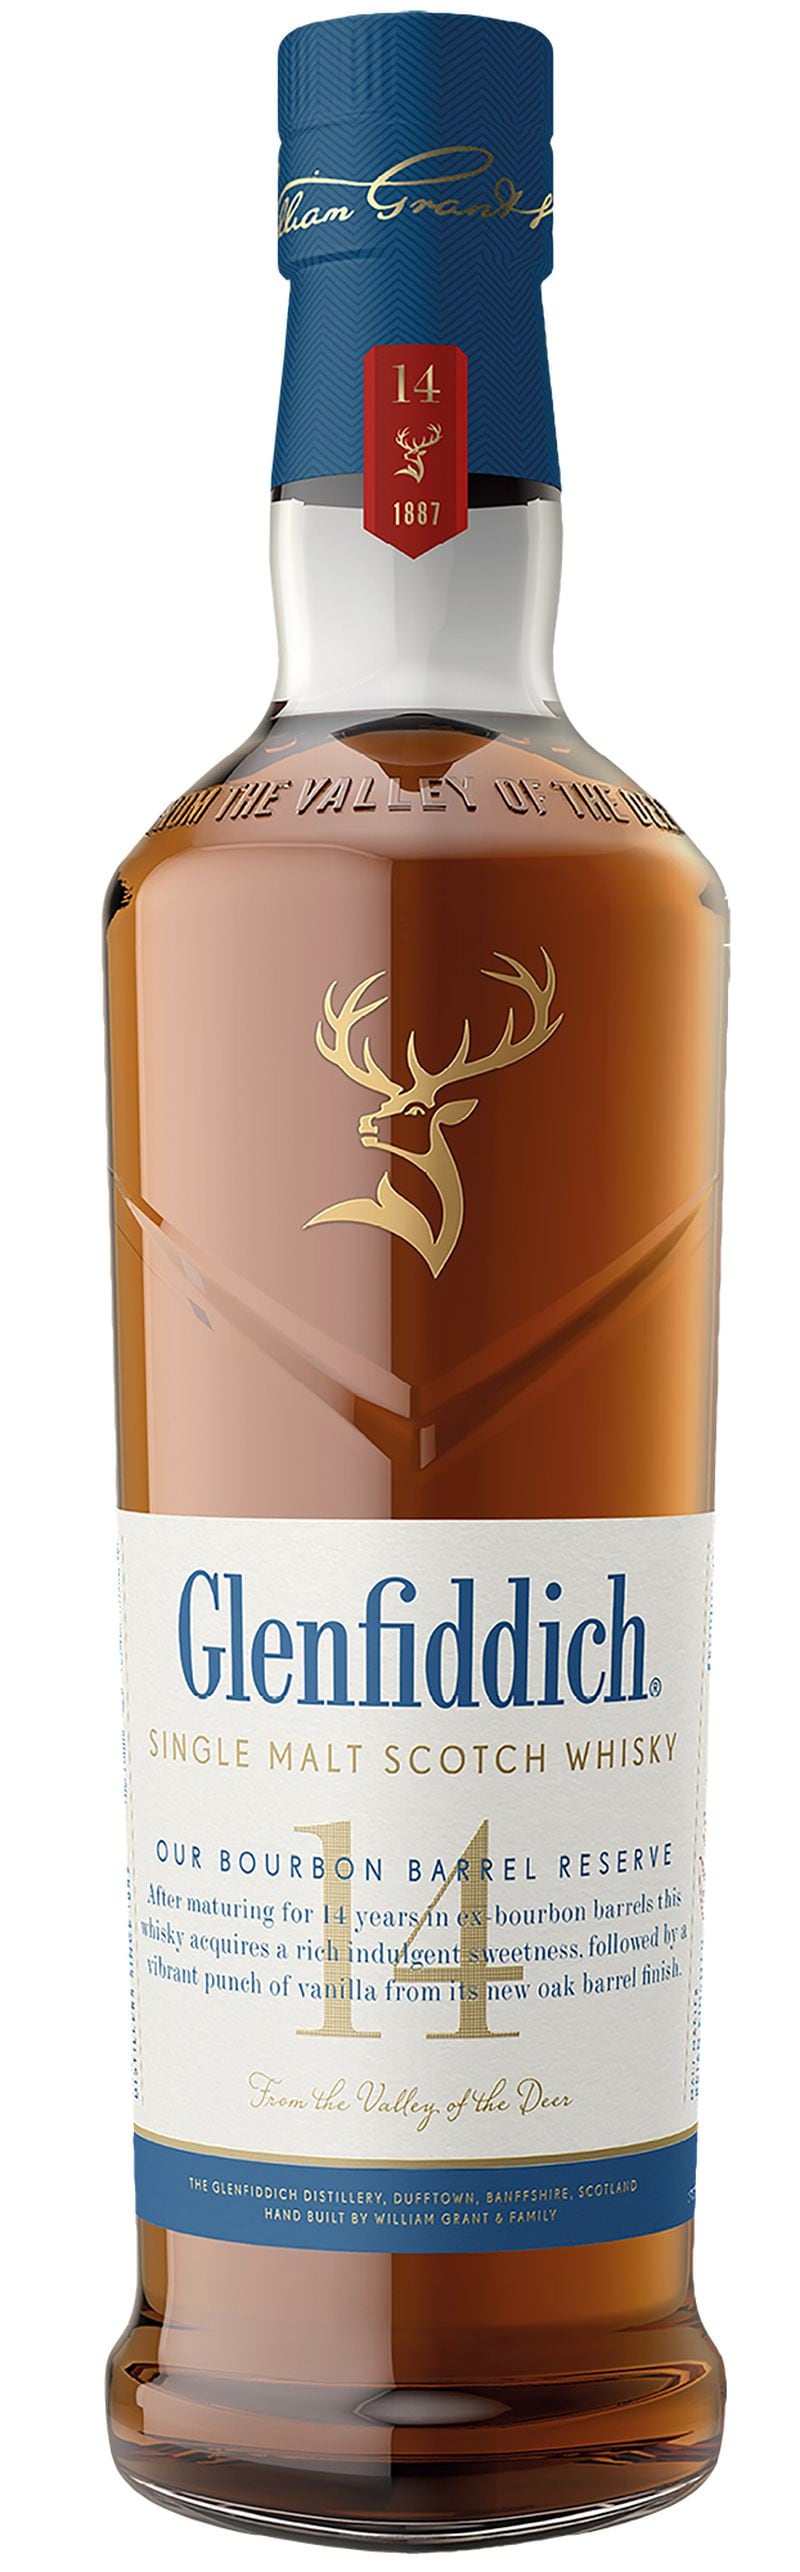 Glenfiddich 14-Year-Old Bourbon Barrel Reserve will inspire both Scotch and bourbon lovers alike. (Courtesy of William Grant & Sons)